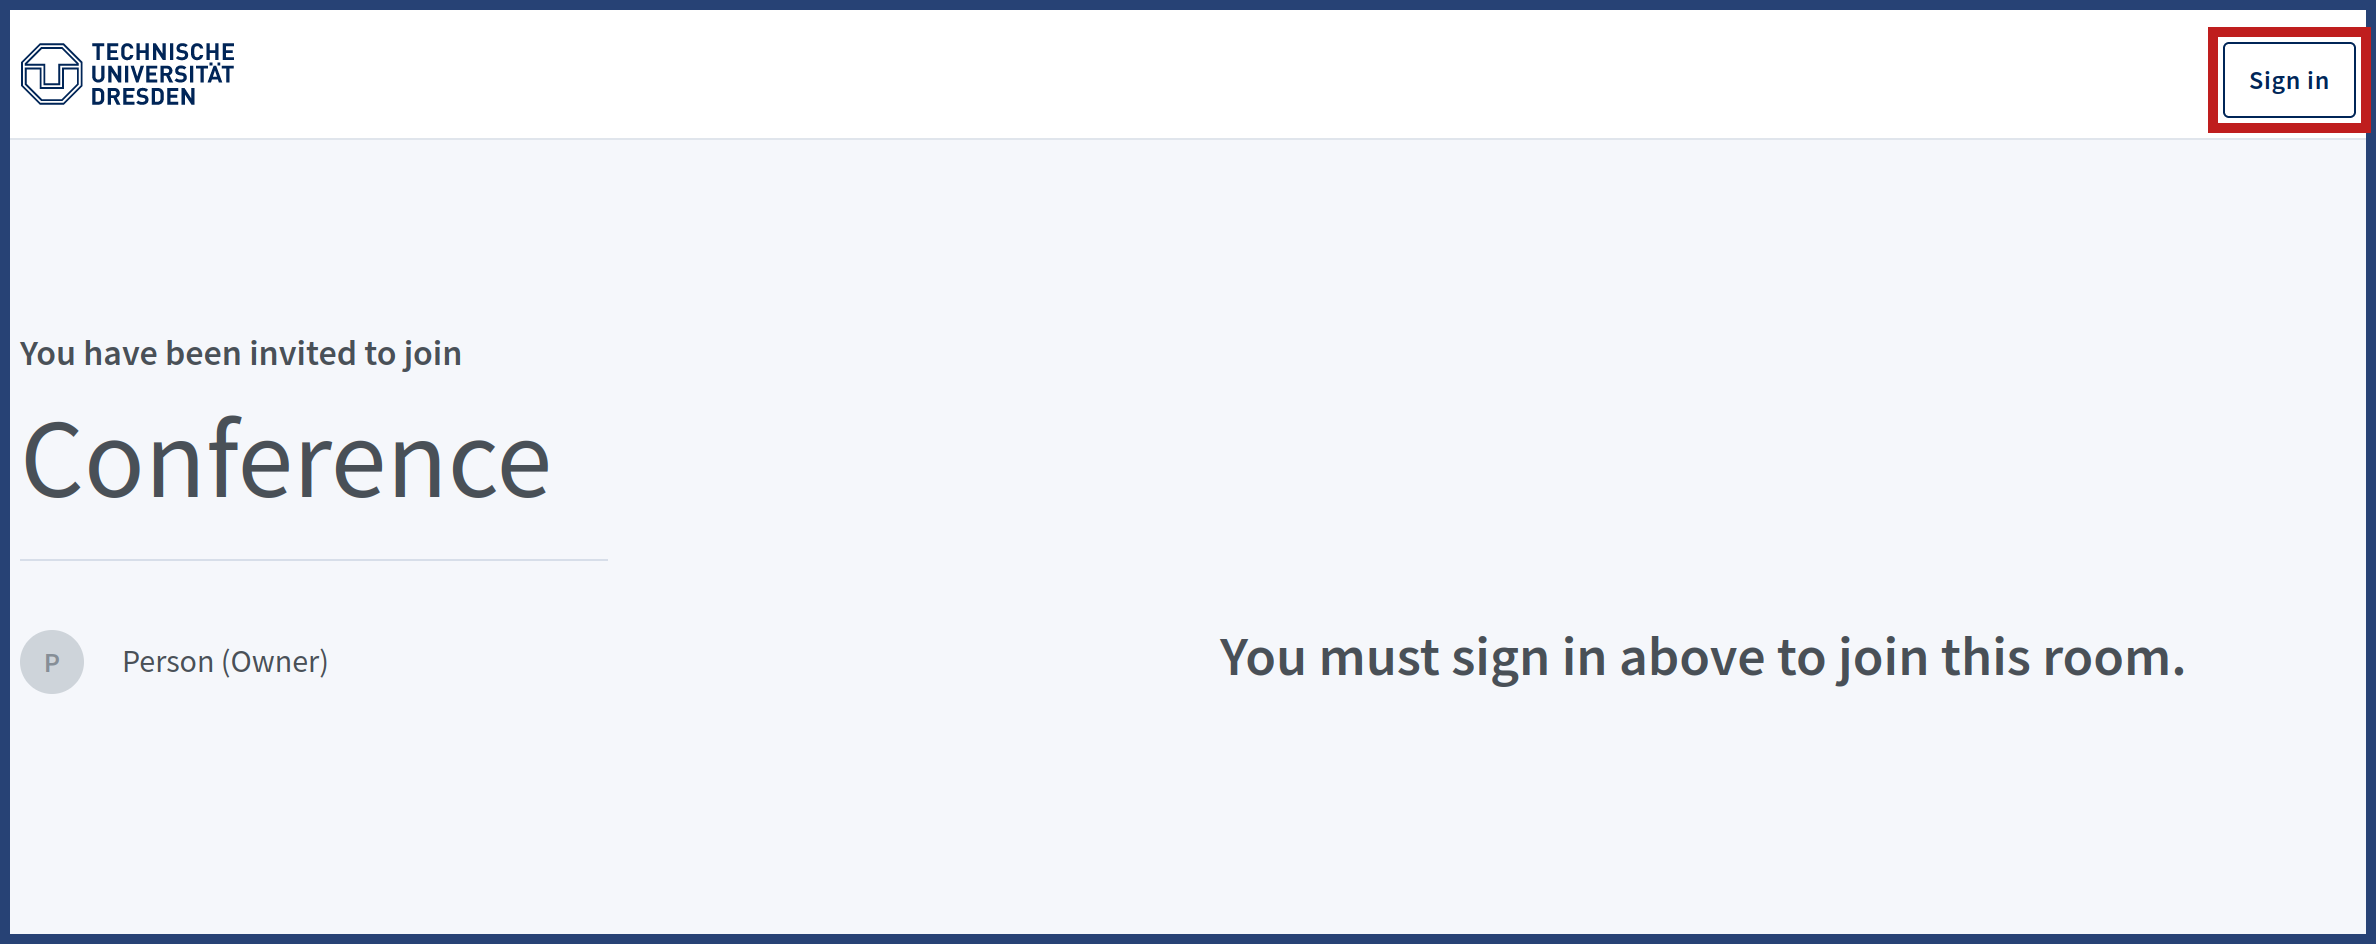 Joining page with request to log in with marker on the "Sign in" button